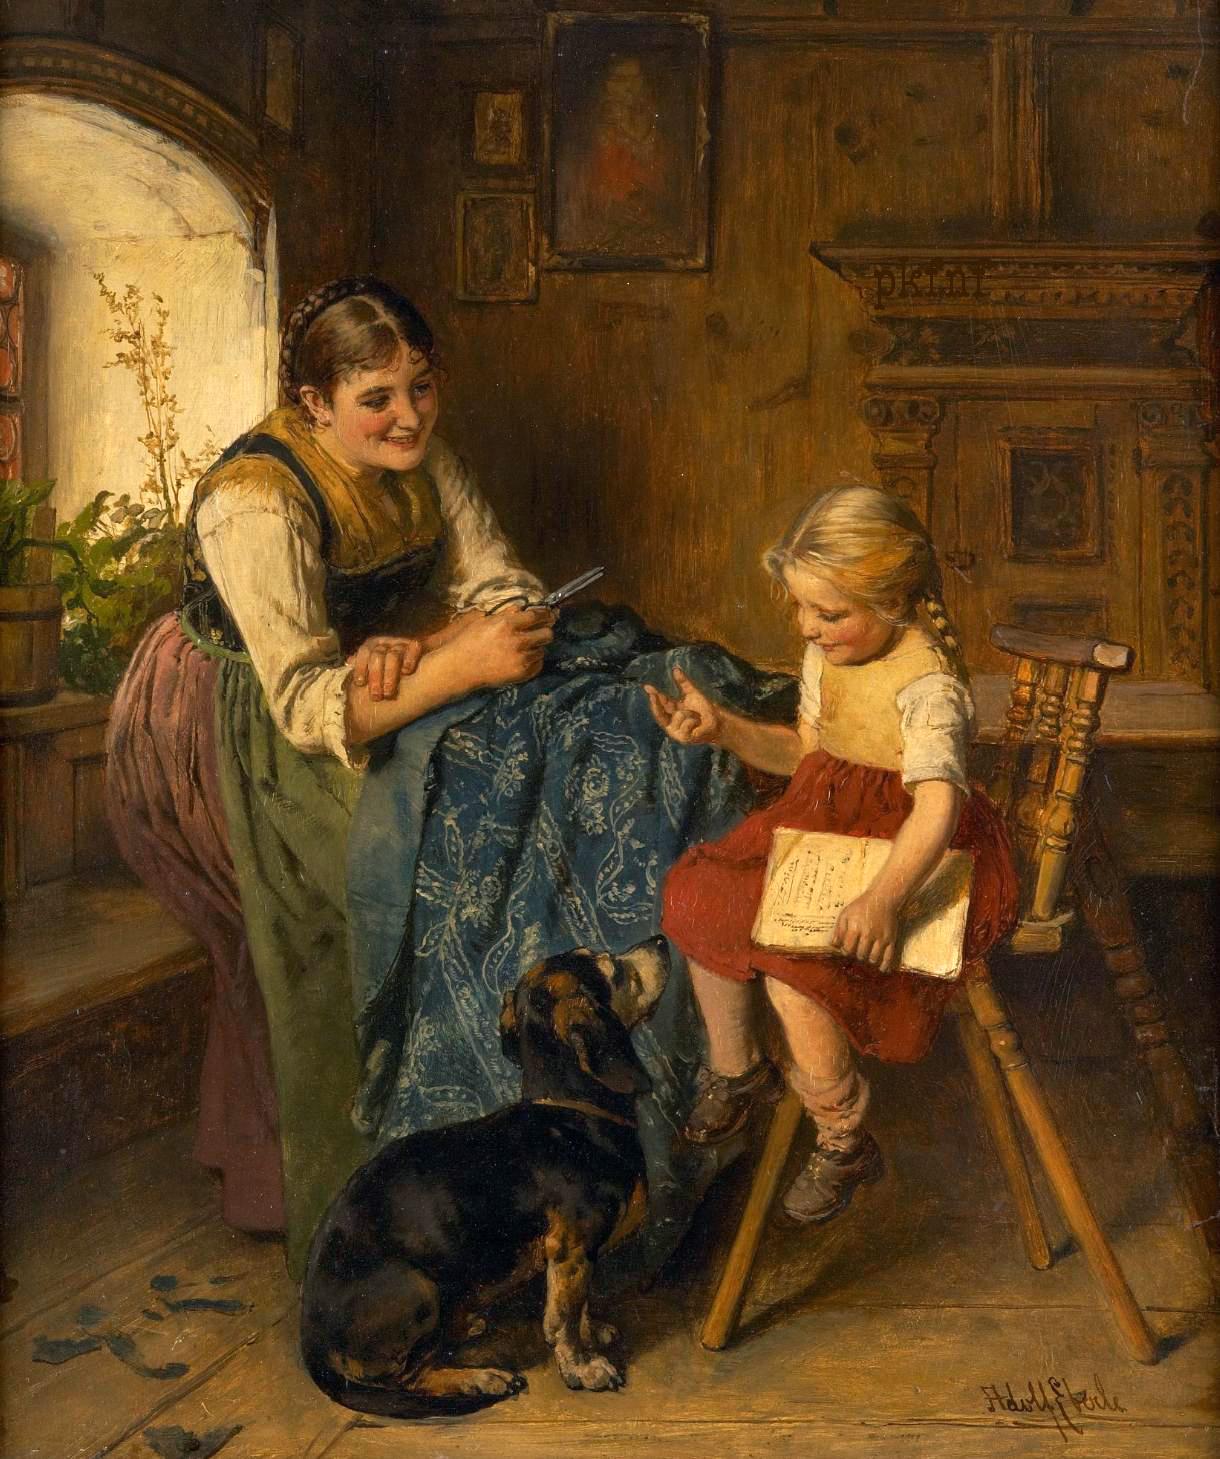 Family scene with young mother, child and dog